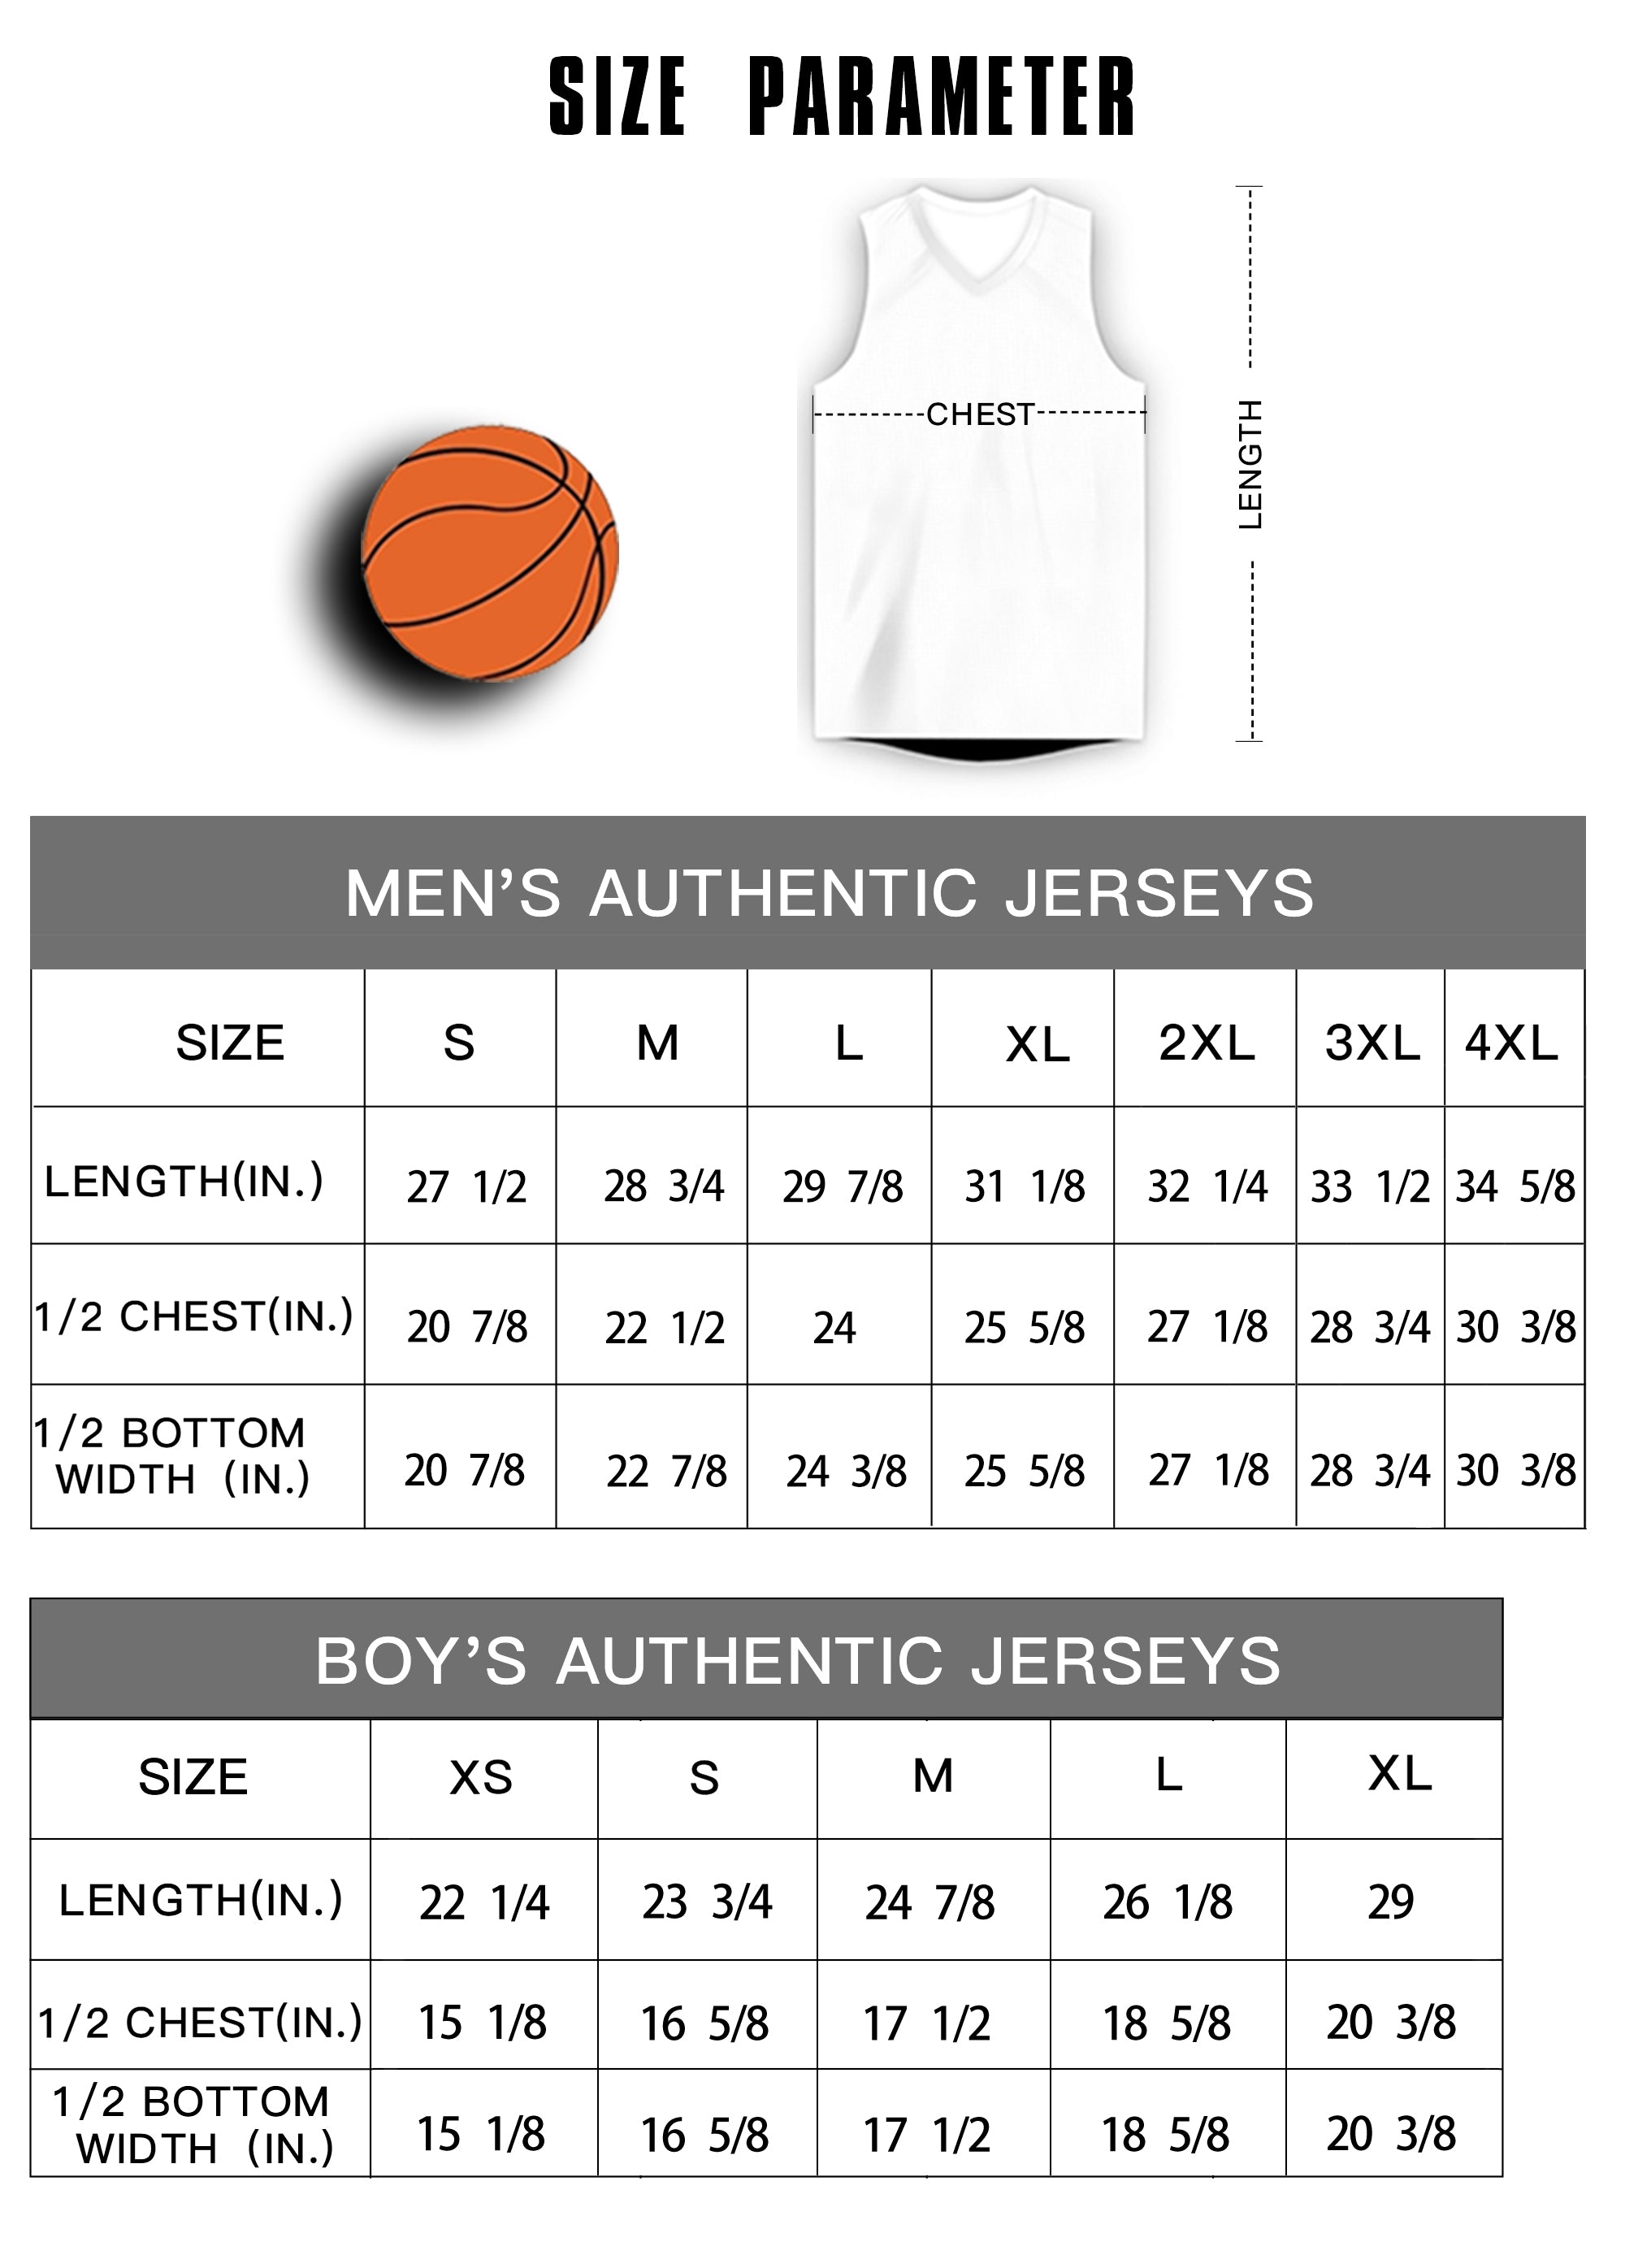 Wholesale Bulls No. 23 blue high quality embroidered basketball jerseys for  men polyester basketball jerseys available wholesale From m.